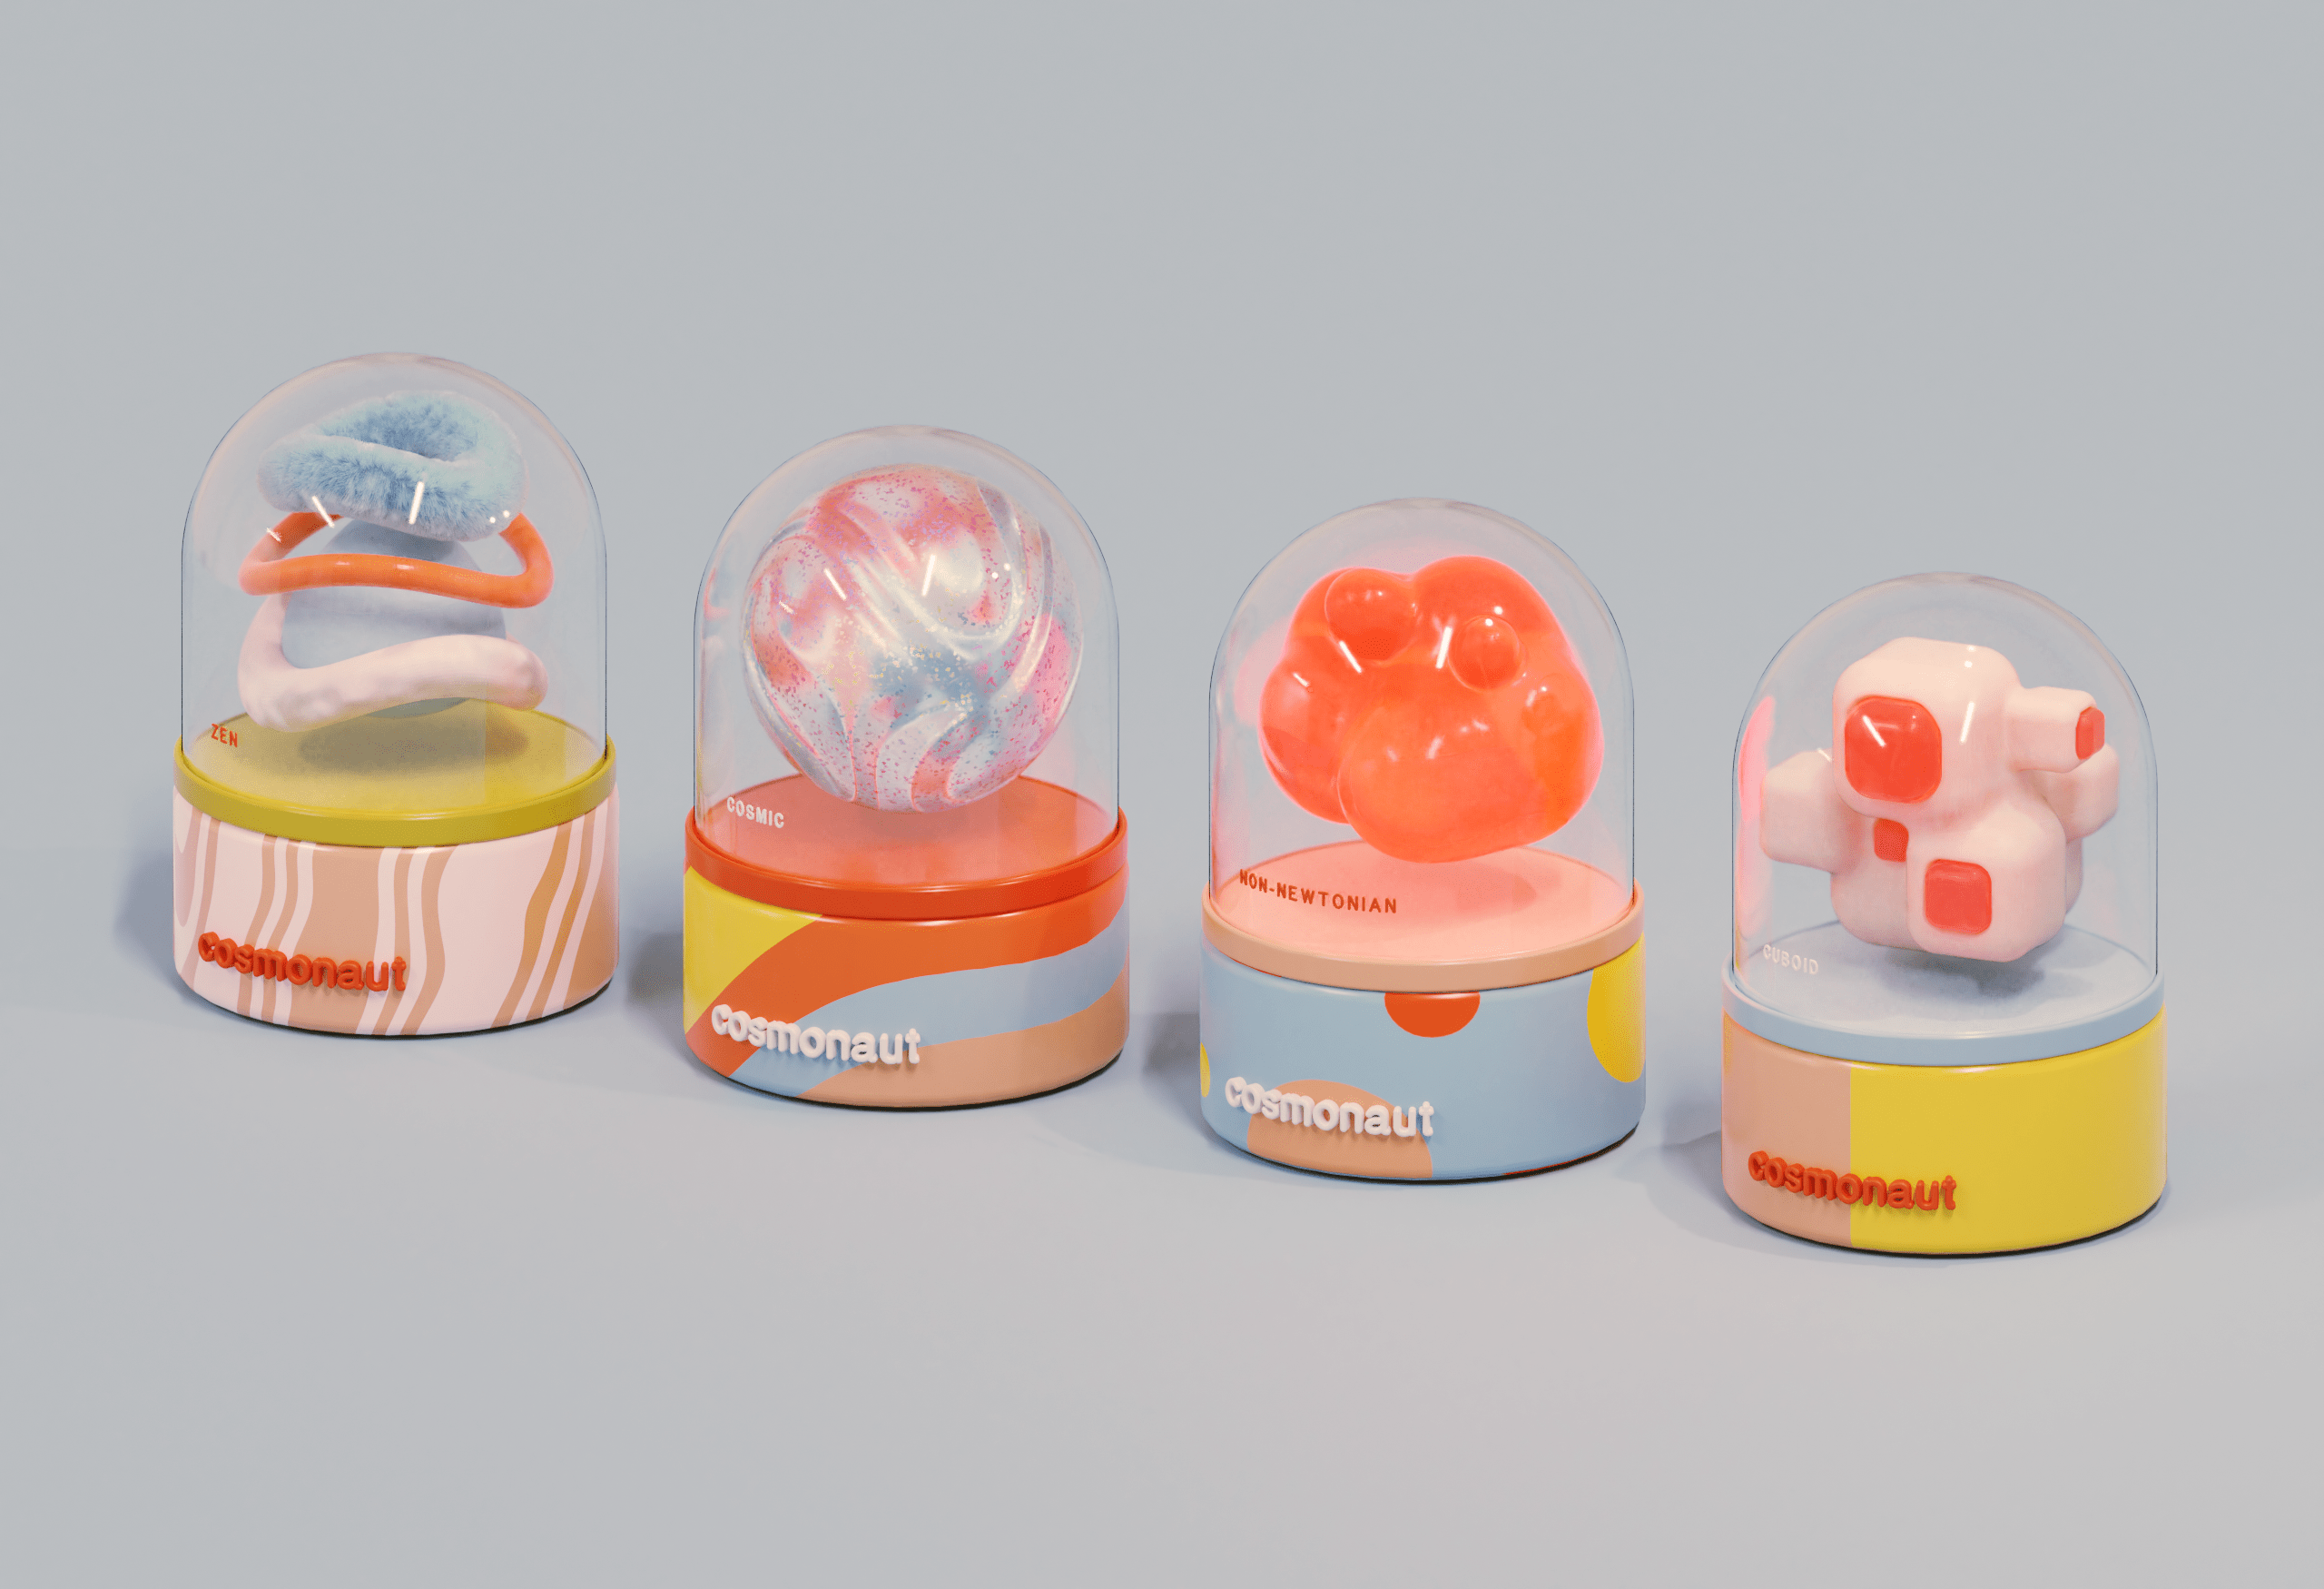 four capsule-shaped items with flattened bases and "cosmonaut" branding at the base. within each is an almost alien-like form resembling gummy and hard candy.